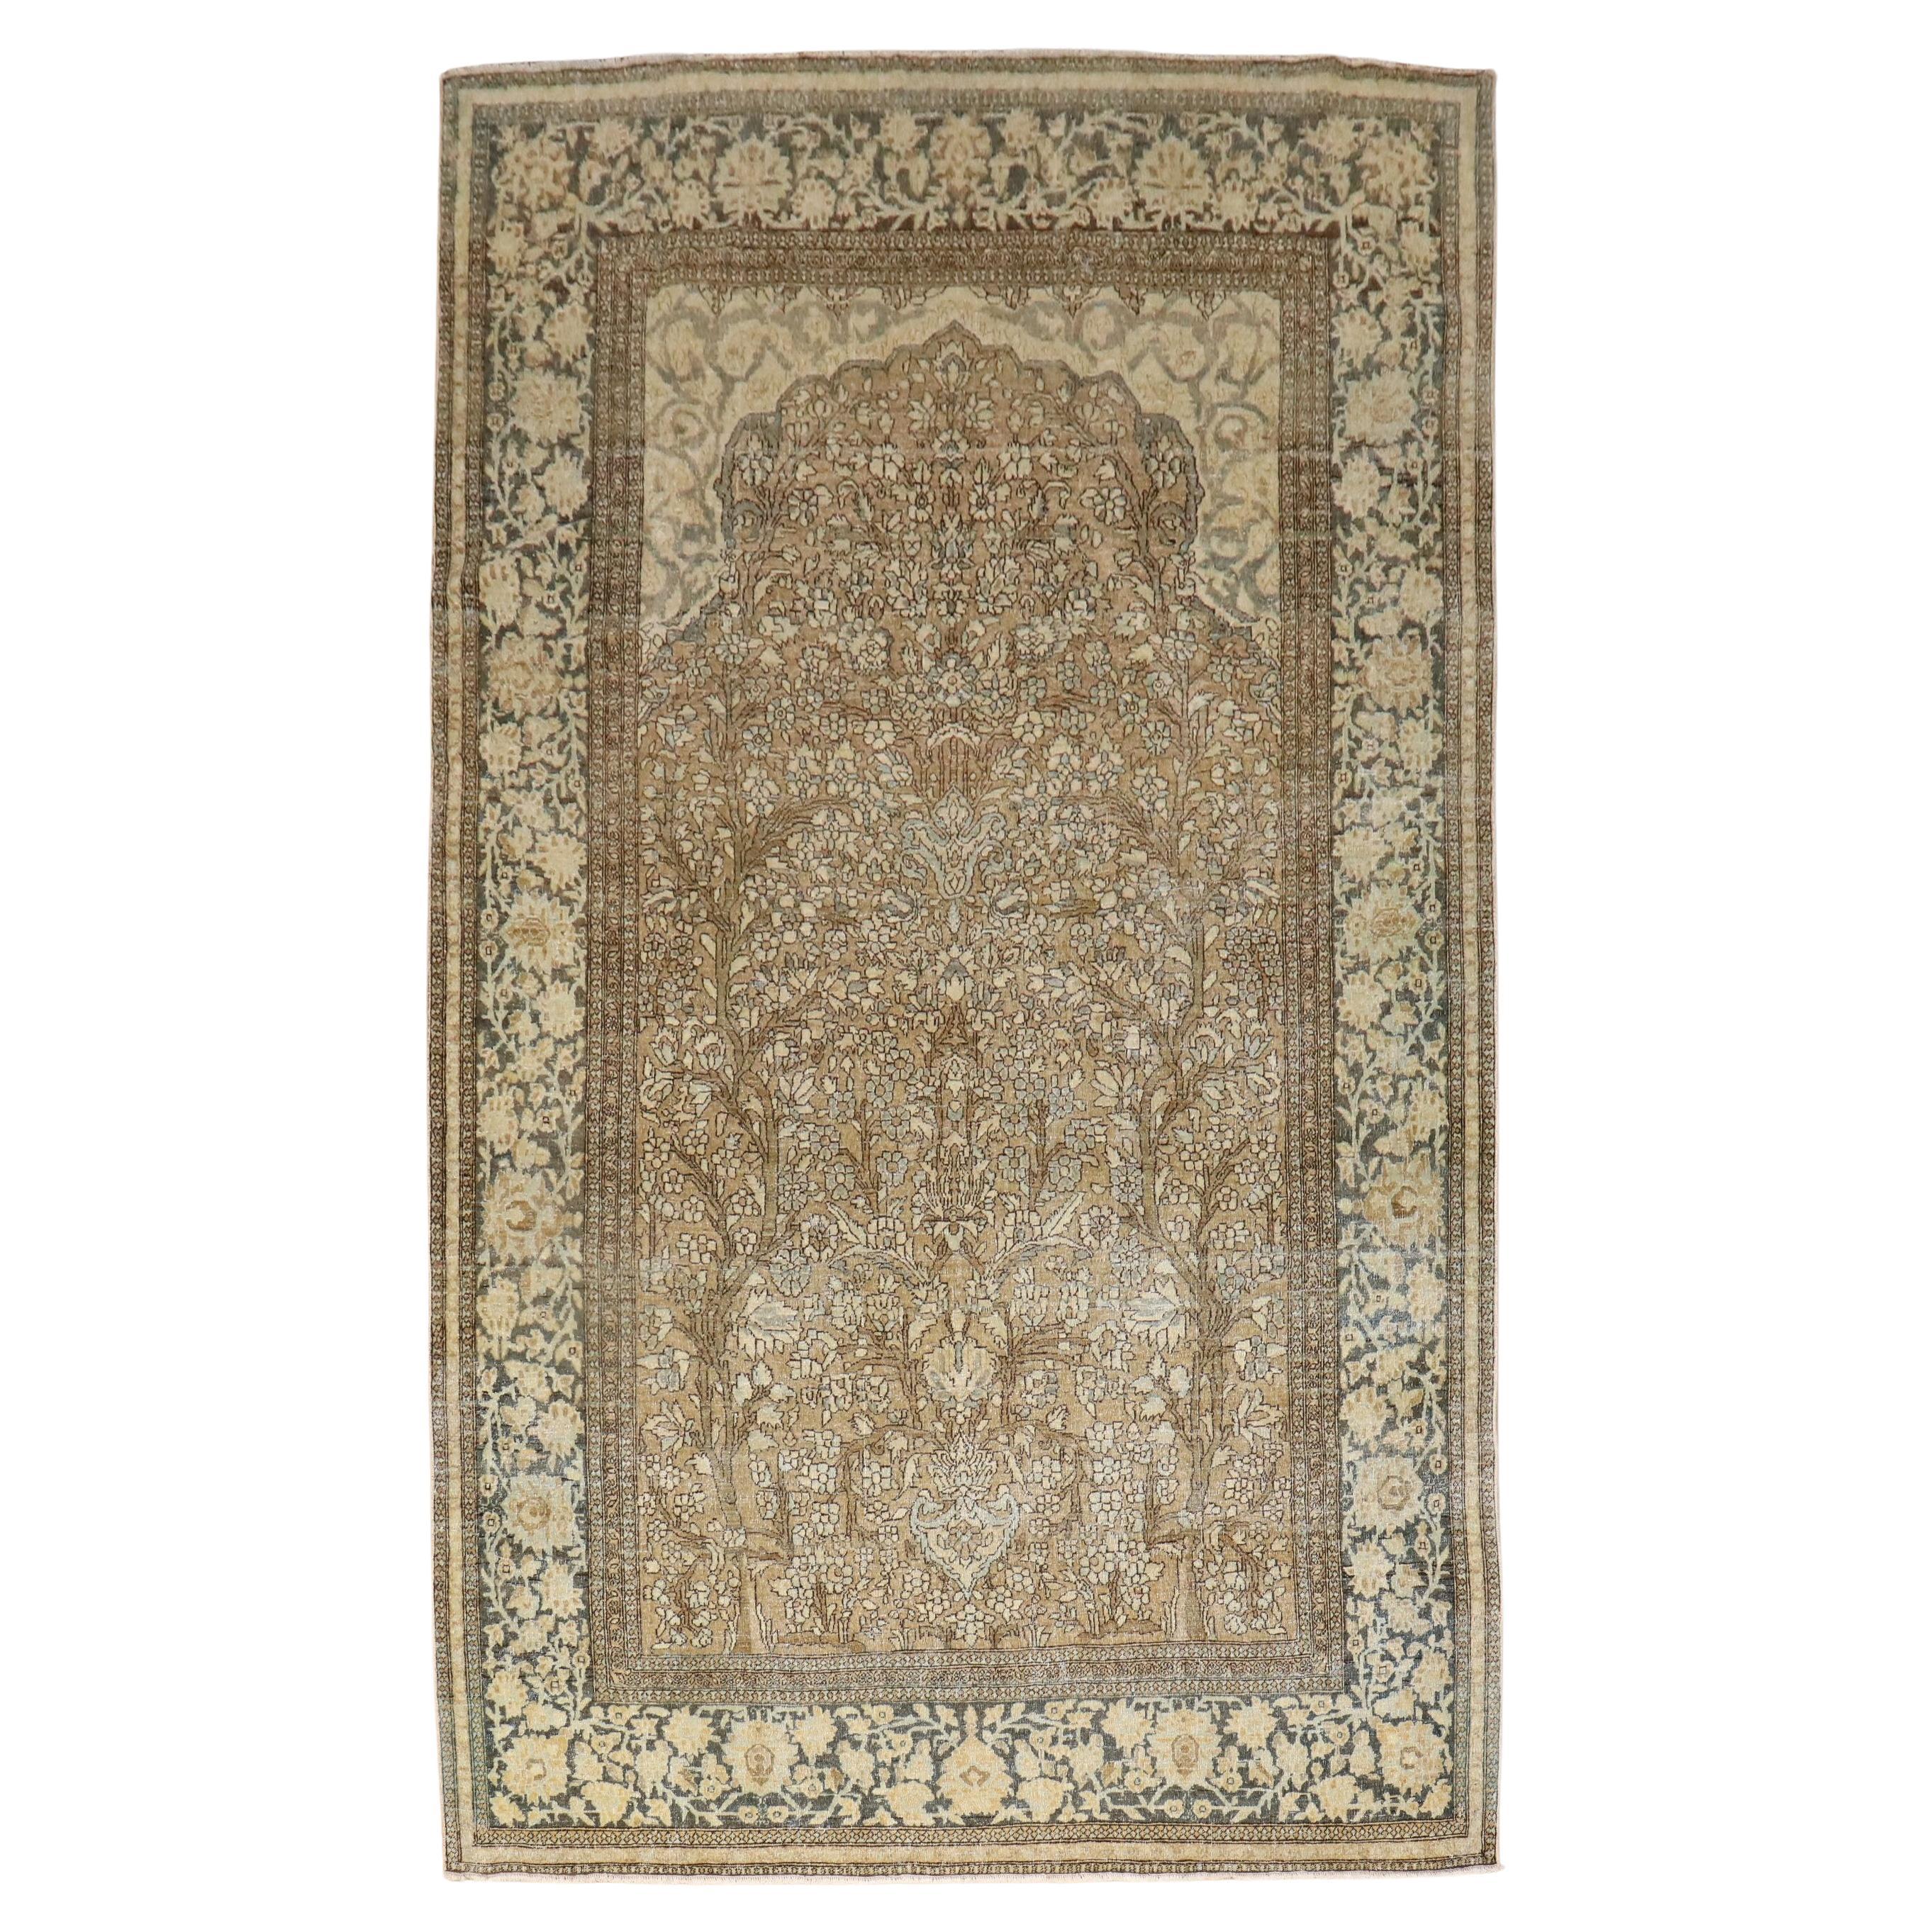 Antique Persian Isfahan Mihrab Prayer Carpet For Sale